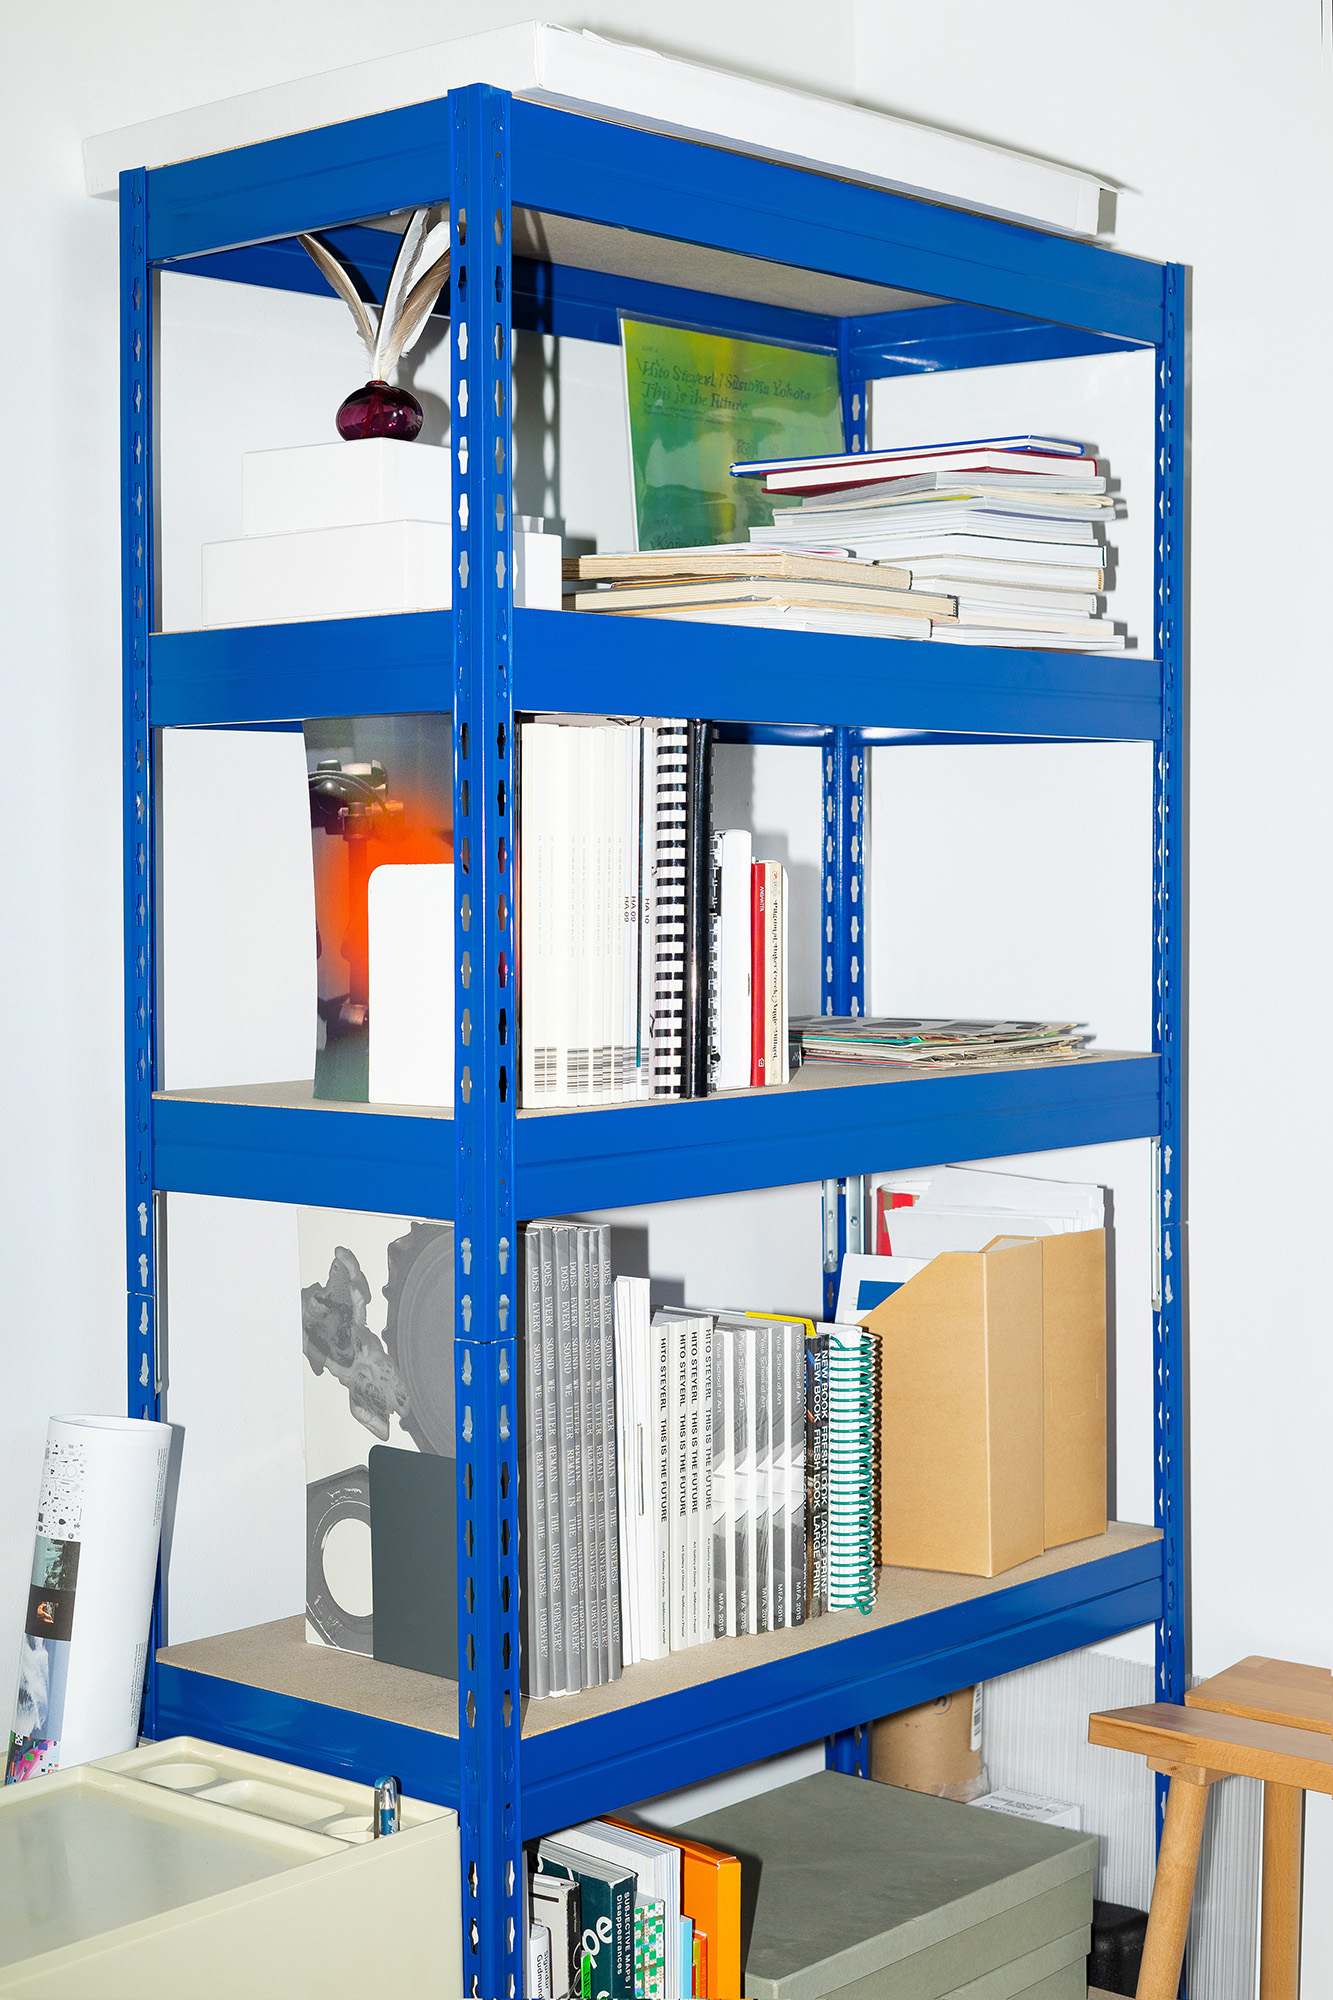 A blue industrial bookcase with various publications, papers and boxes.